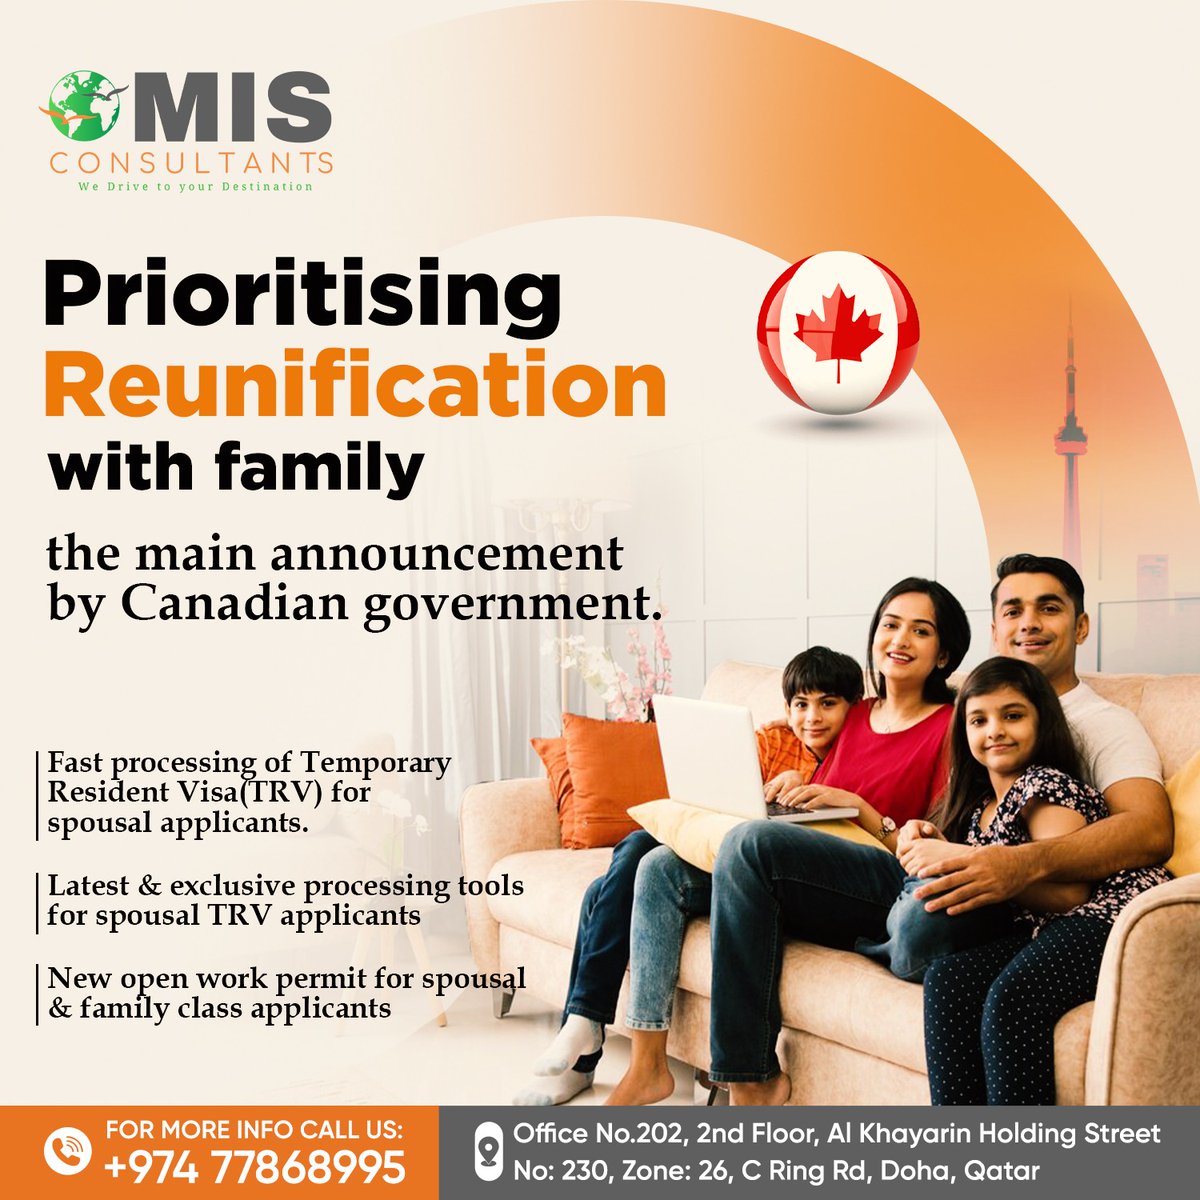 🇨🇦 Prioritising Reunification with family   the main announcement by Canadian government
#canada  #permanentresidence #immigrationconsultant #immigrationlawyer #immigrationservices #settleinabroad  #immigrationconsultants #dreamjob #dreamcountry #immigrationassistance